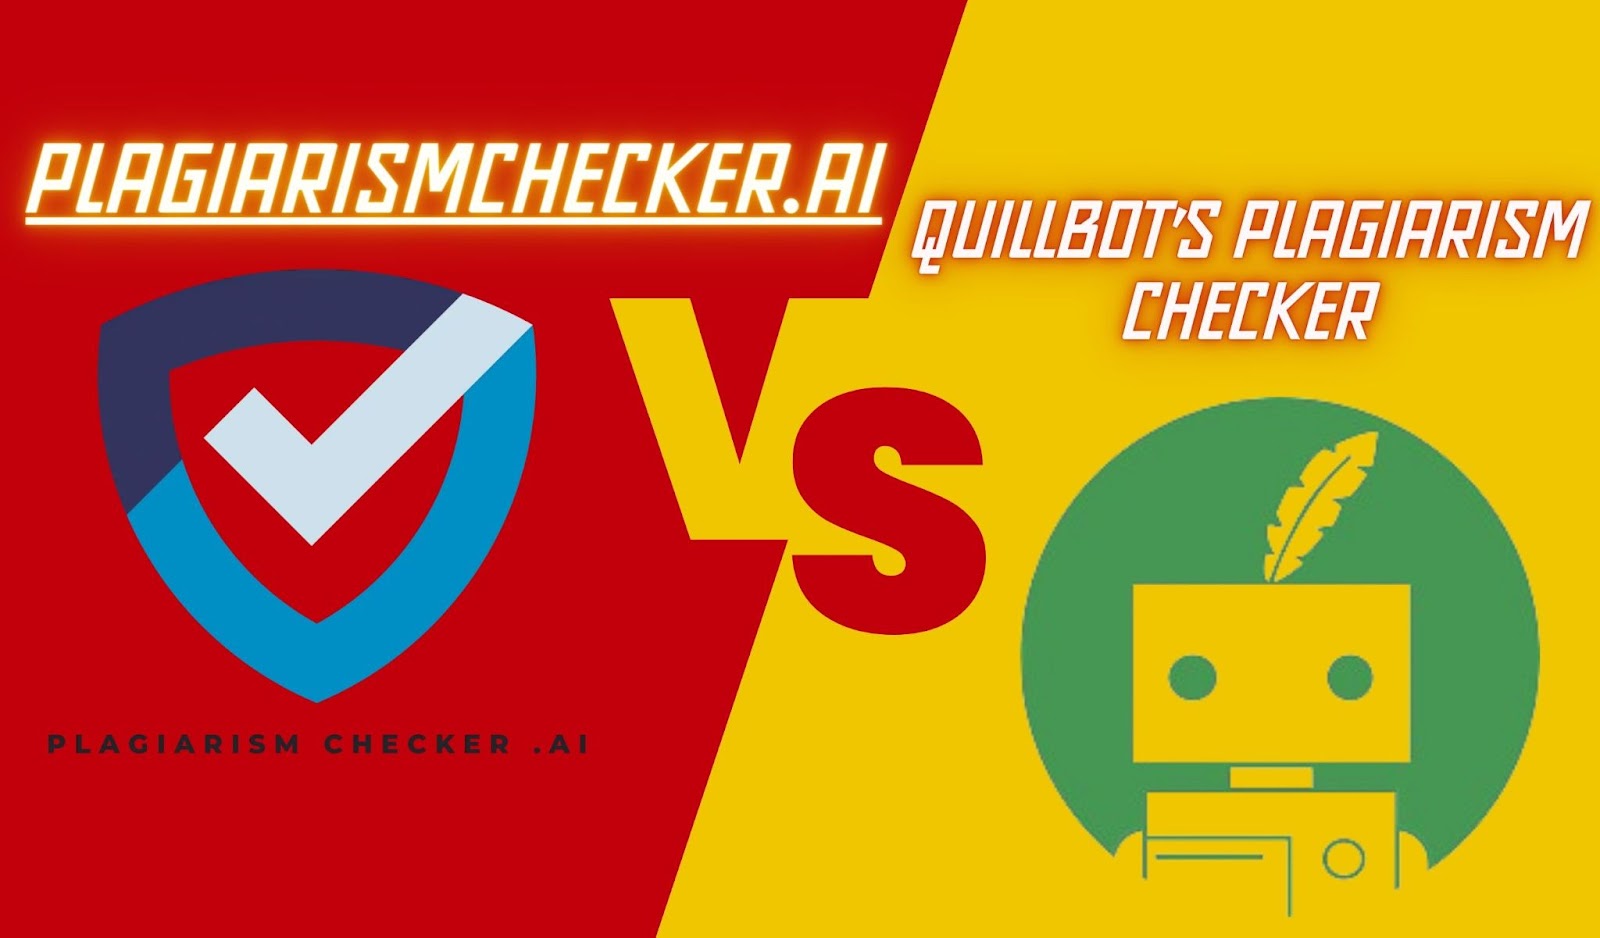 Plagiarismchecker.ai vs Quillbot's plagiarism checker: Which one is better and why?